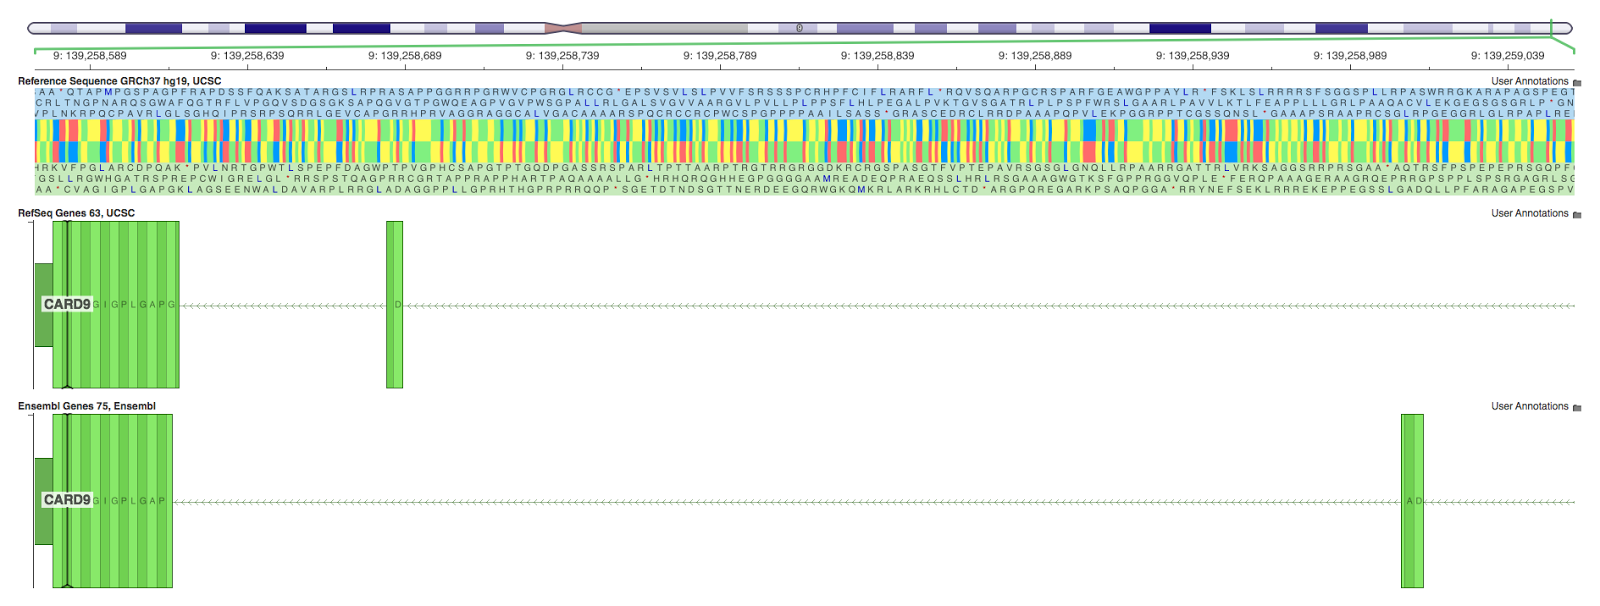 Genomebrowse viewer on BLAT/Ensembl placement